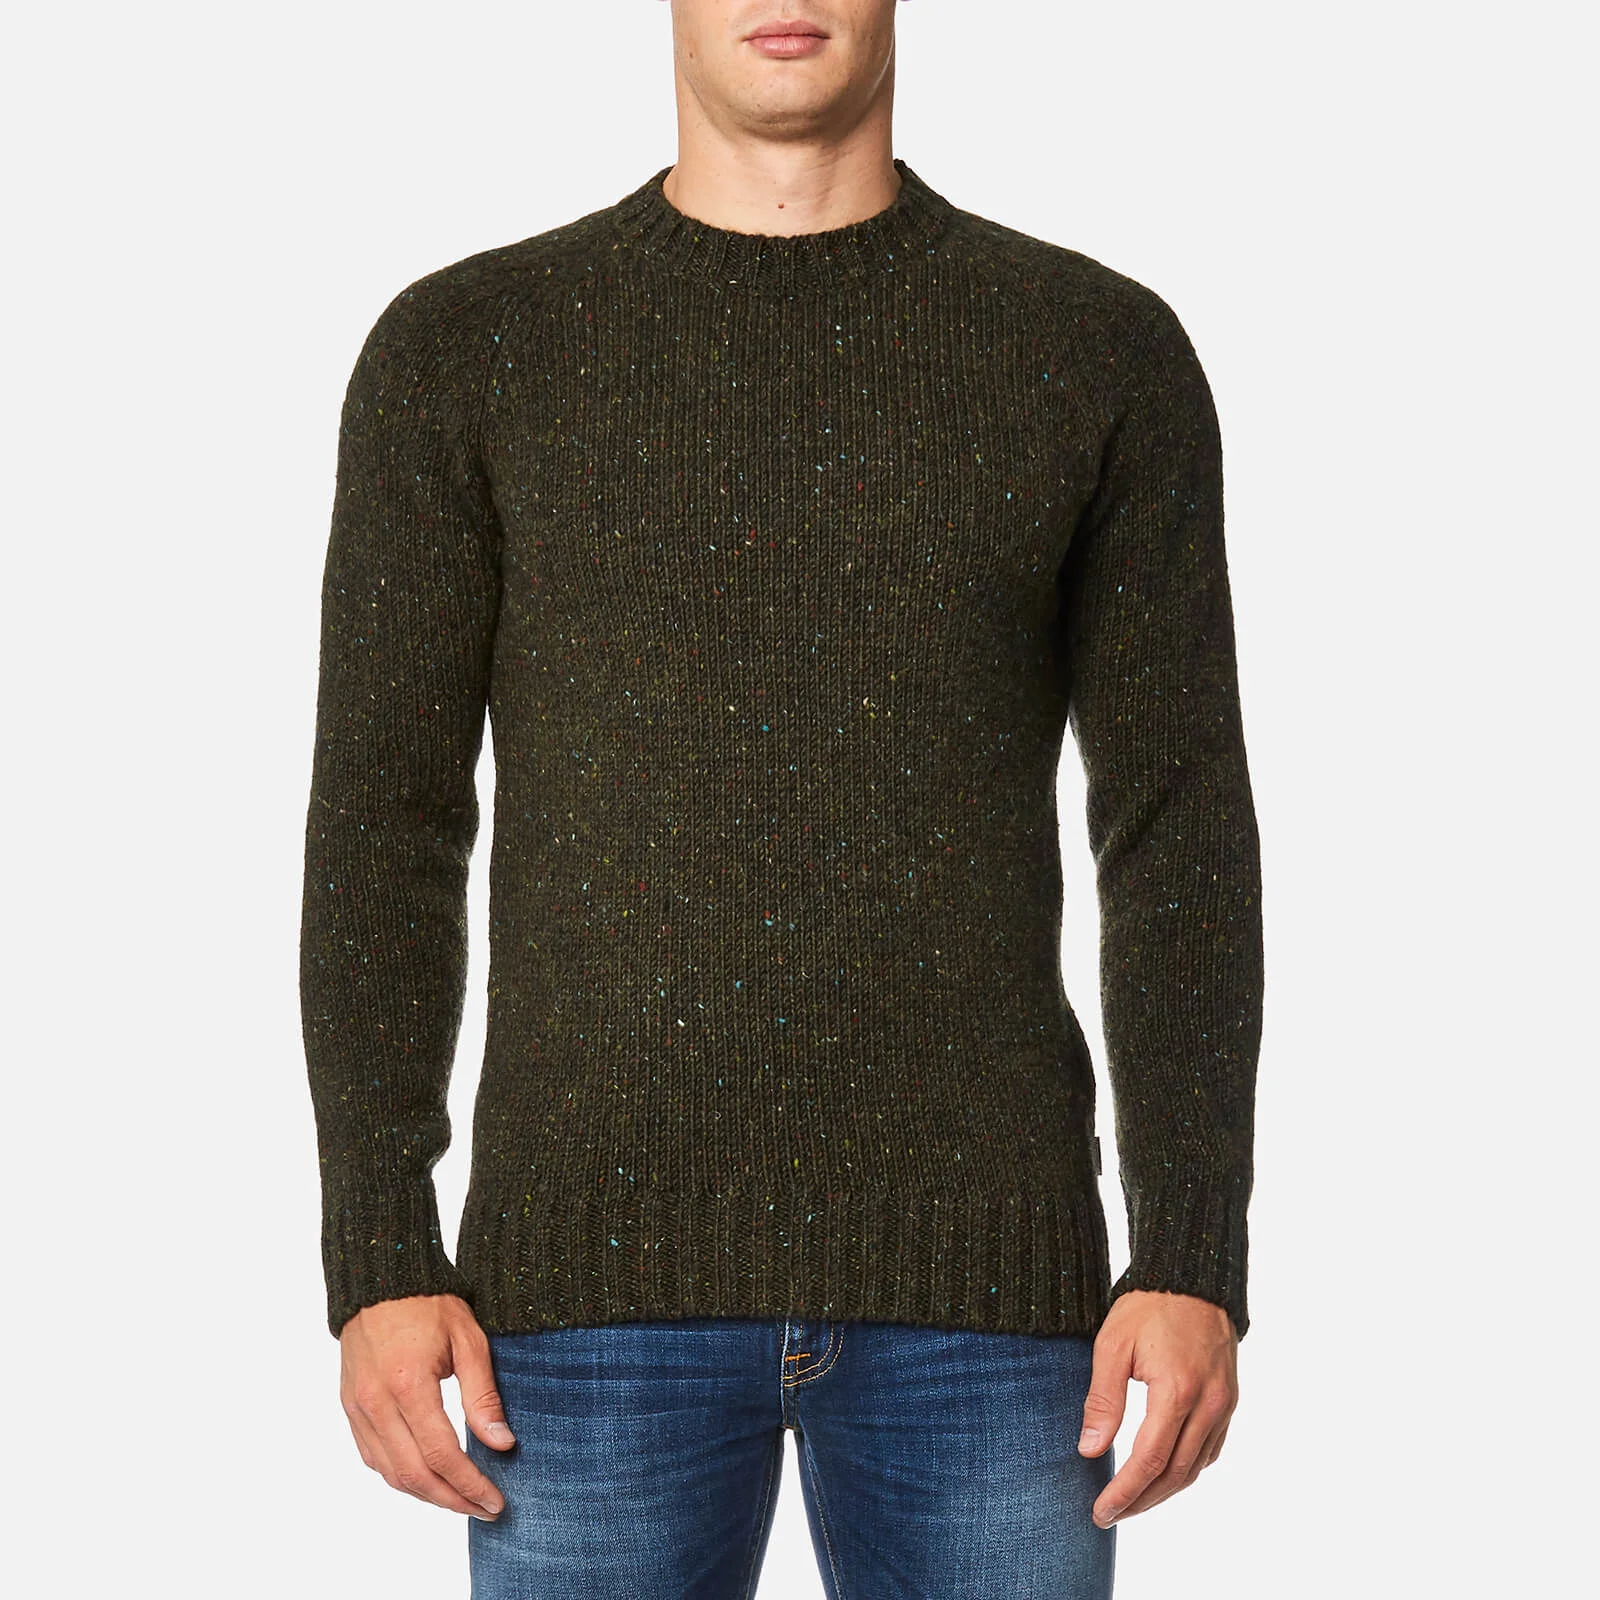 Barbour Men's Netherby Crew Neck Knitted Jumper - Forest Image 1